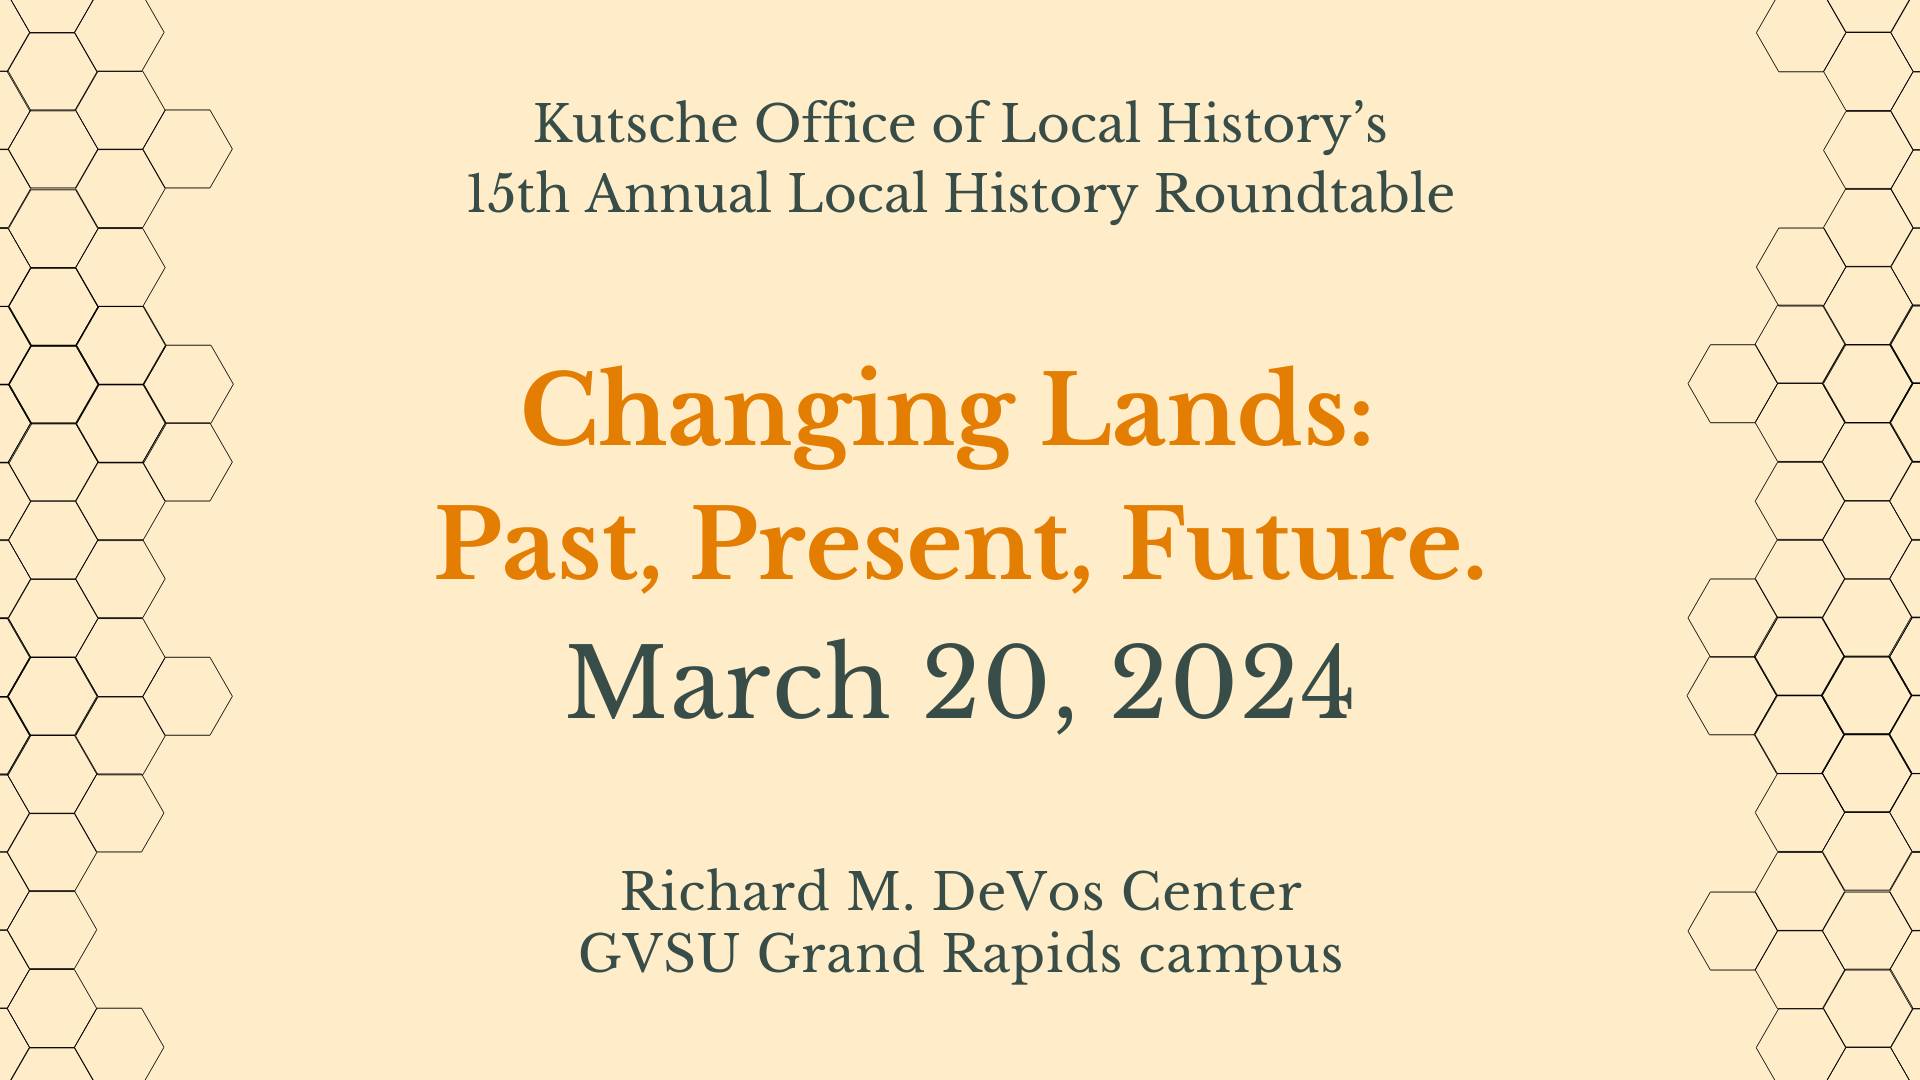 Changing Lands: Past, Present, Future.